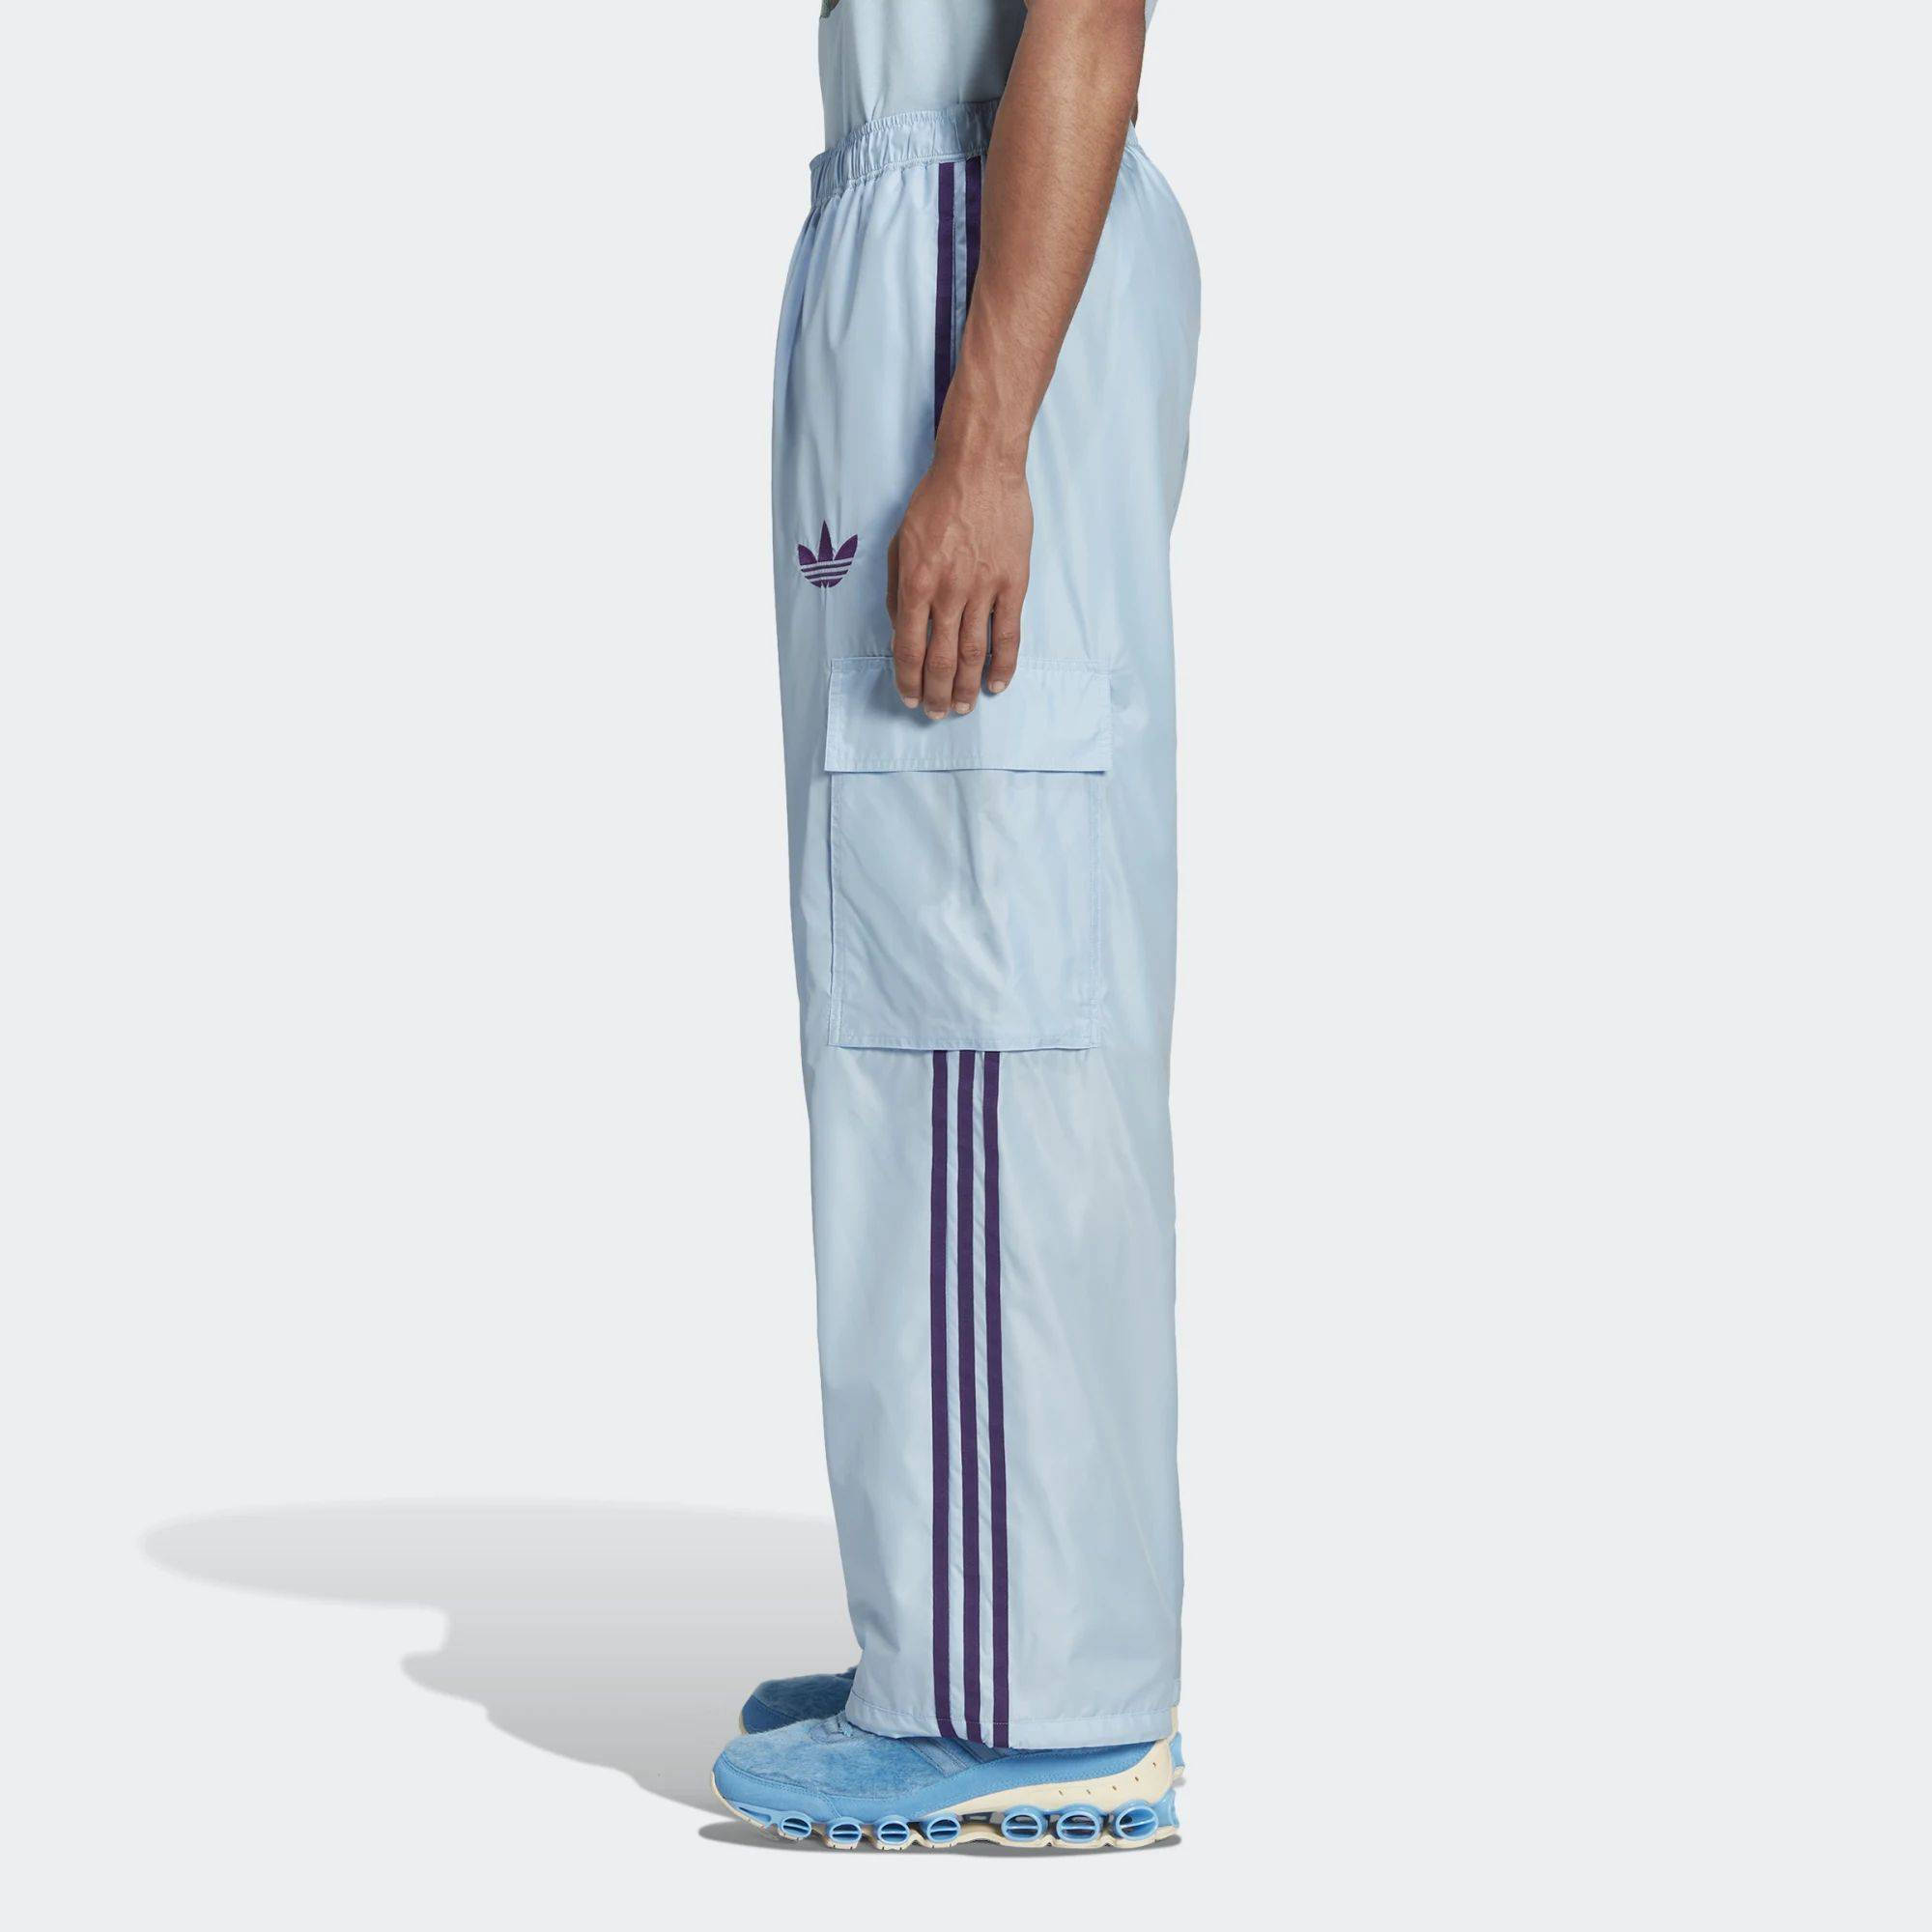 adidas Baggy Track Pants x Kerwin Frost - H59894 - Sneakersnstuff (SNS)